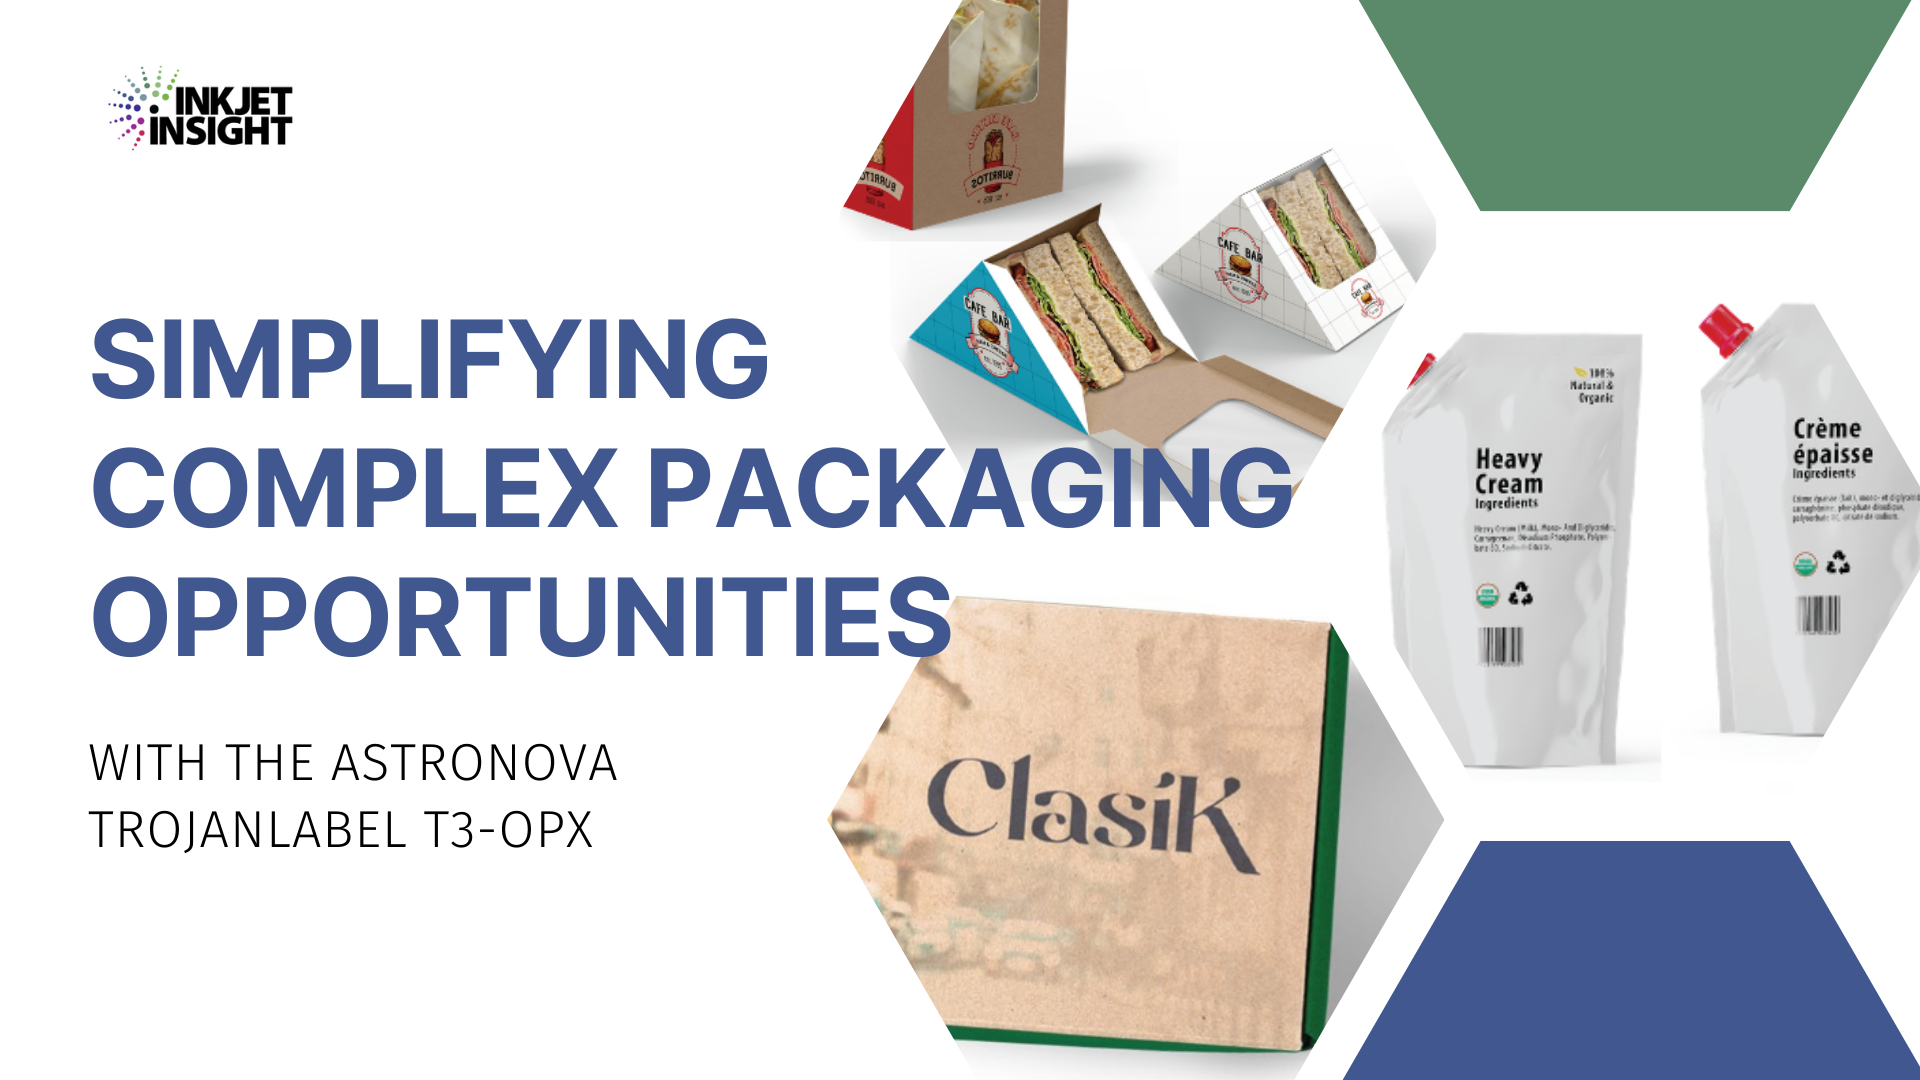 Featured image for “Simplifying Complex Packaging Opportunities with the AstroNova TrojanLabel T3-OPX”